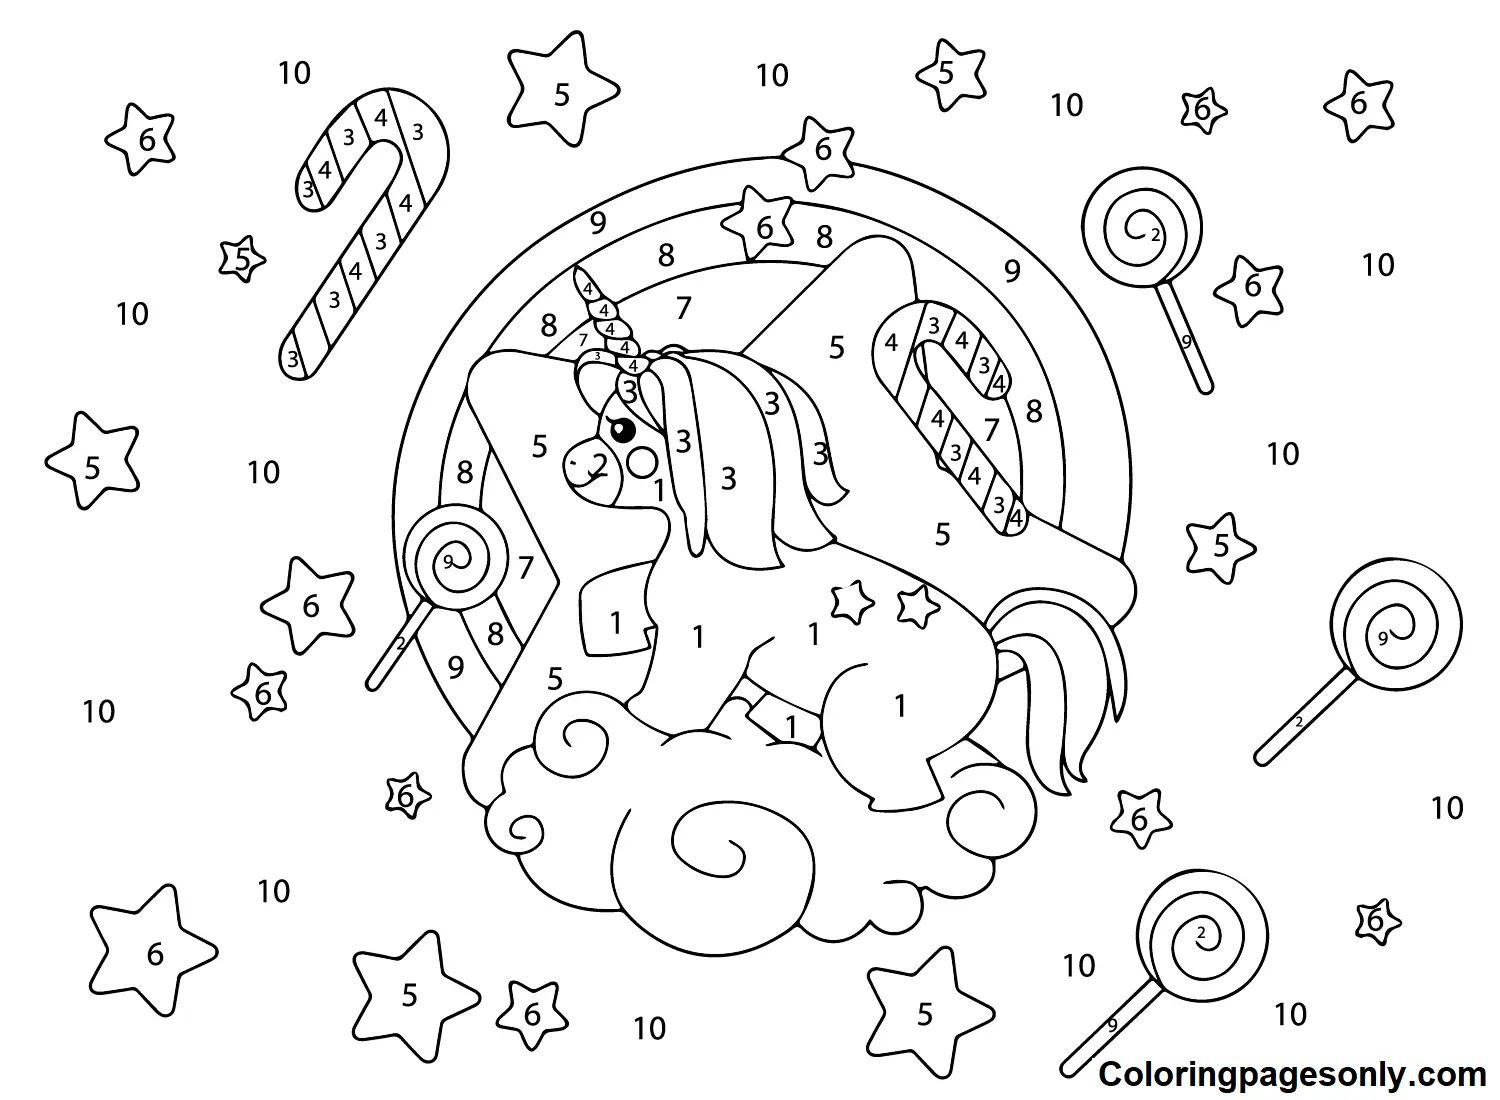 Unicorn Color By Number Coloring Pages